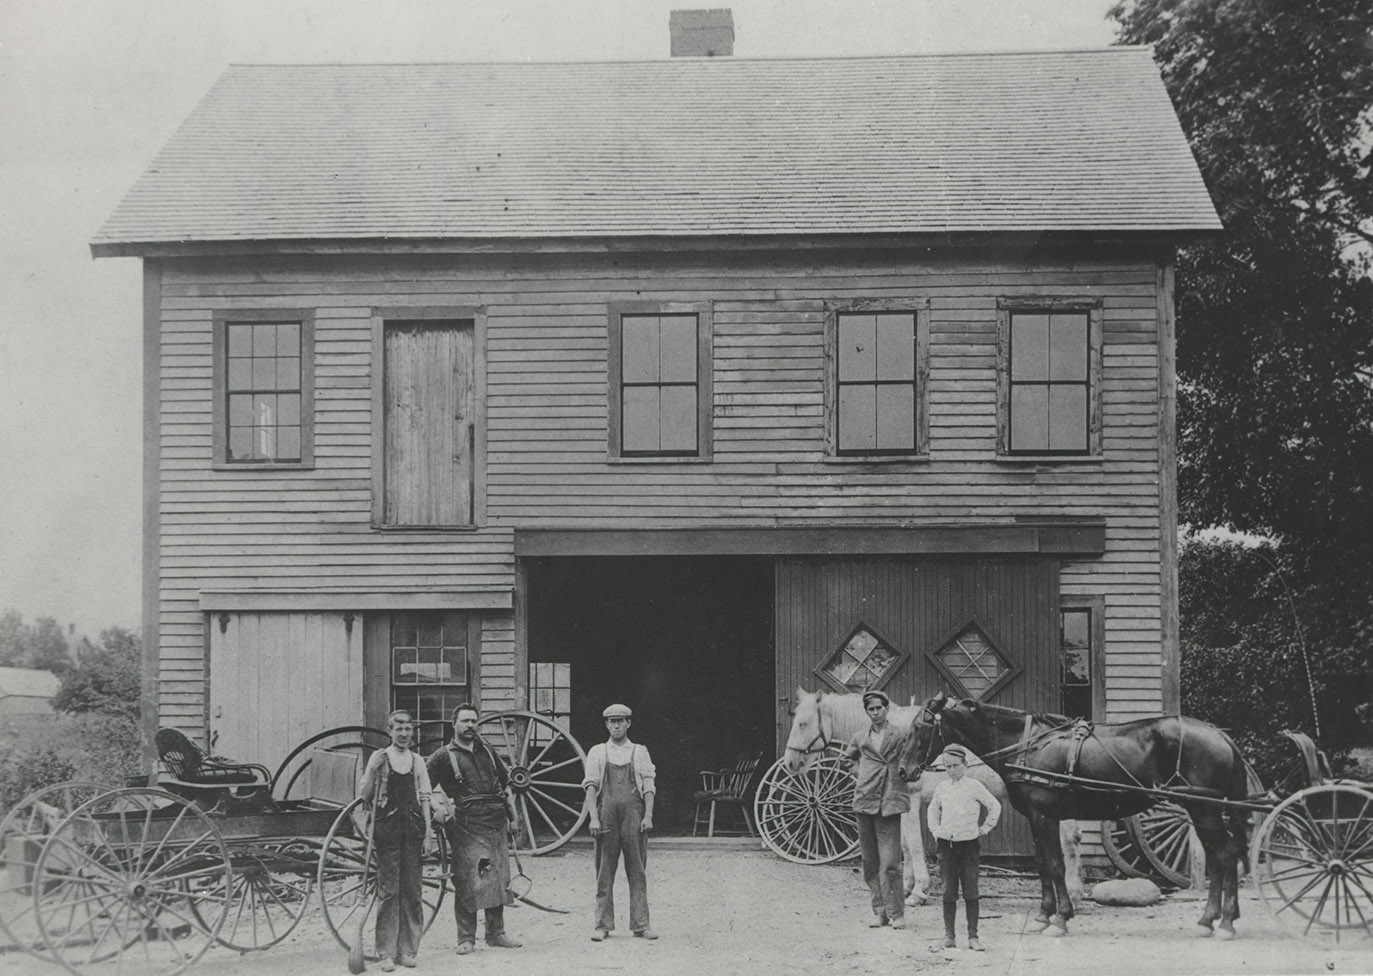 Blacksmith shop specializing in the fabrication of horse buggy wheels